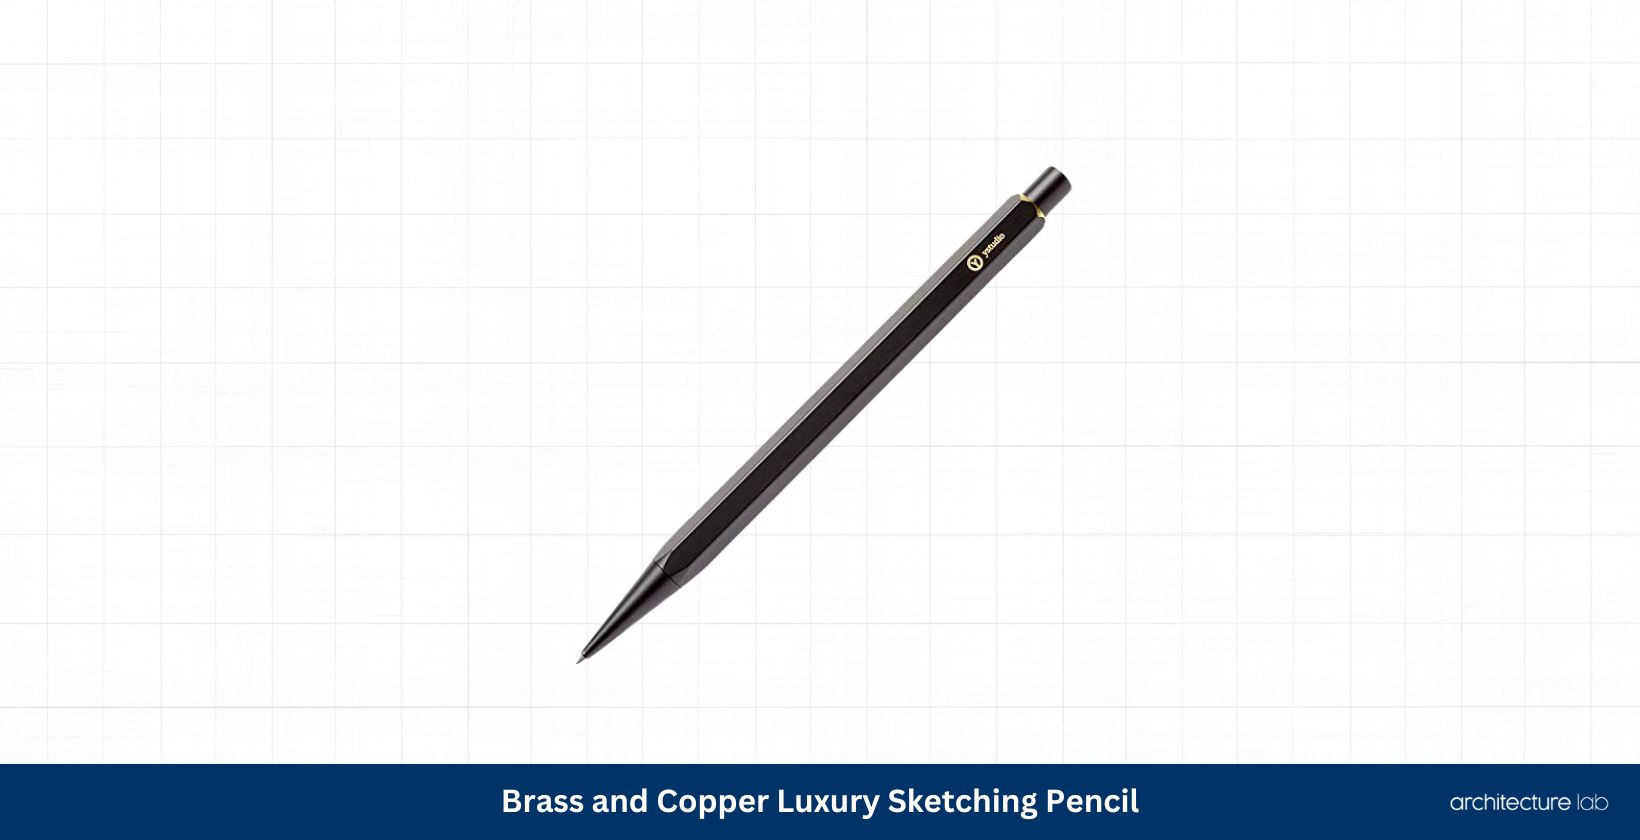 Brass and copper luxury sketching pencil